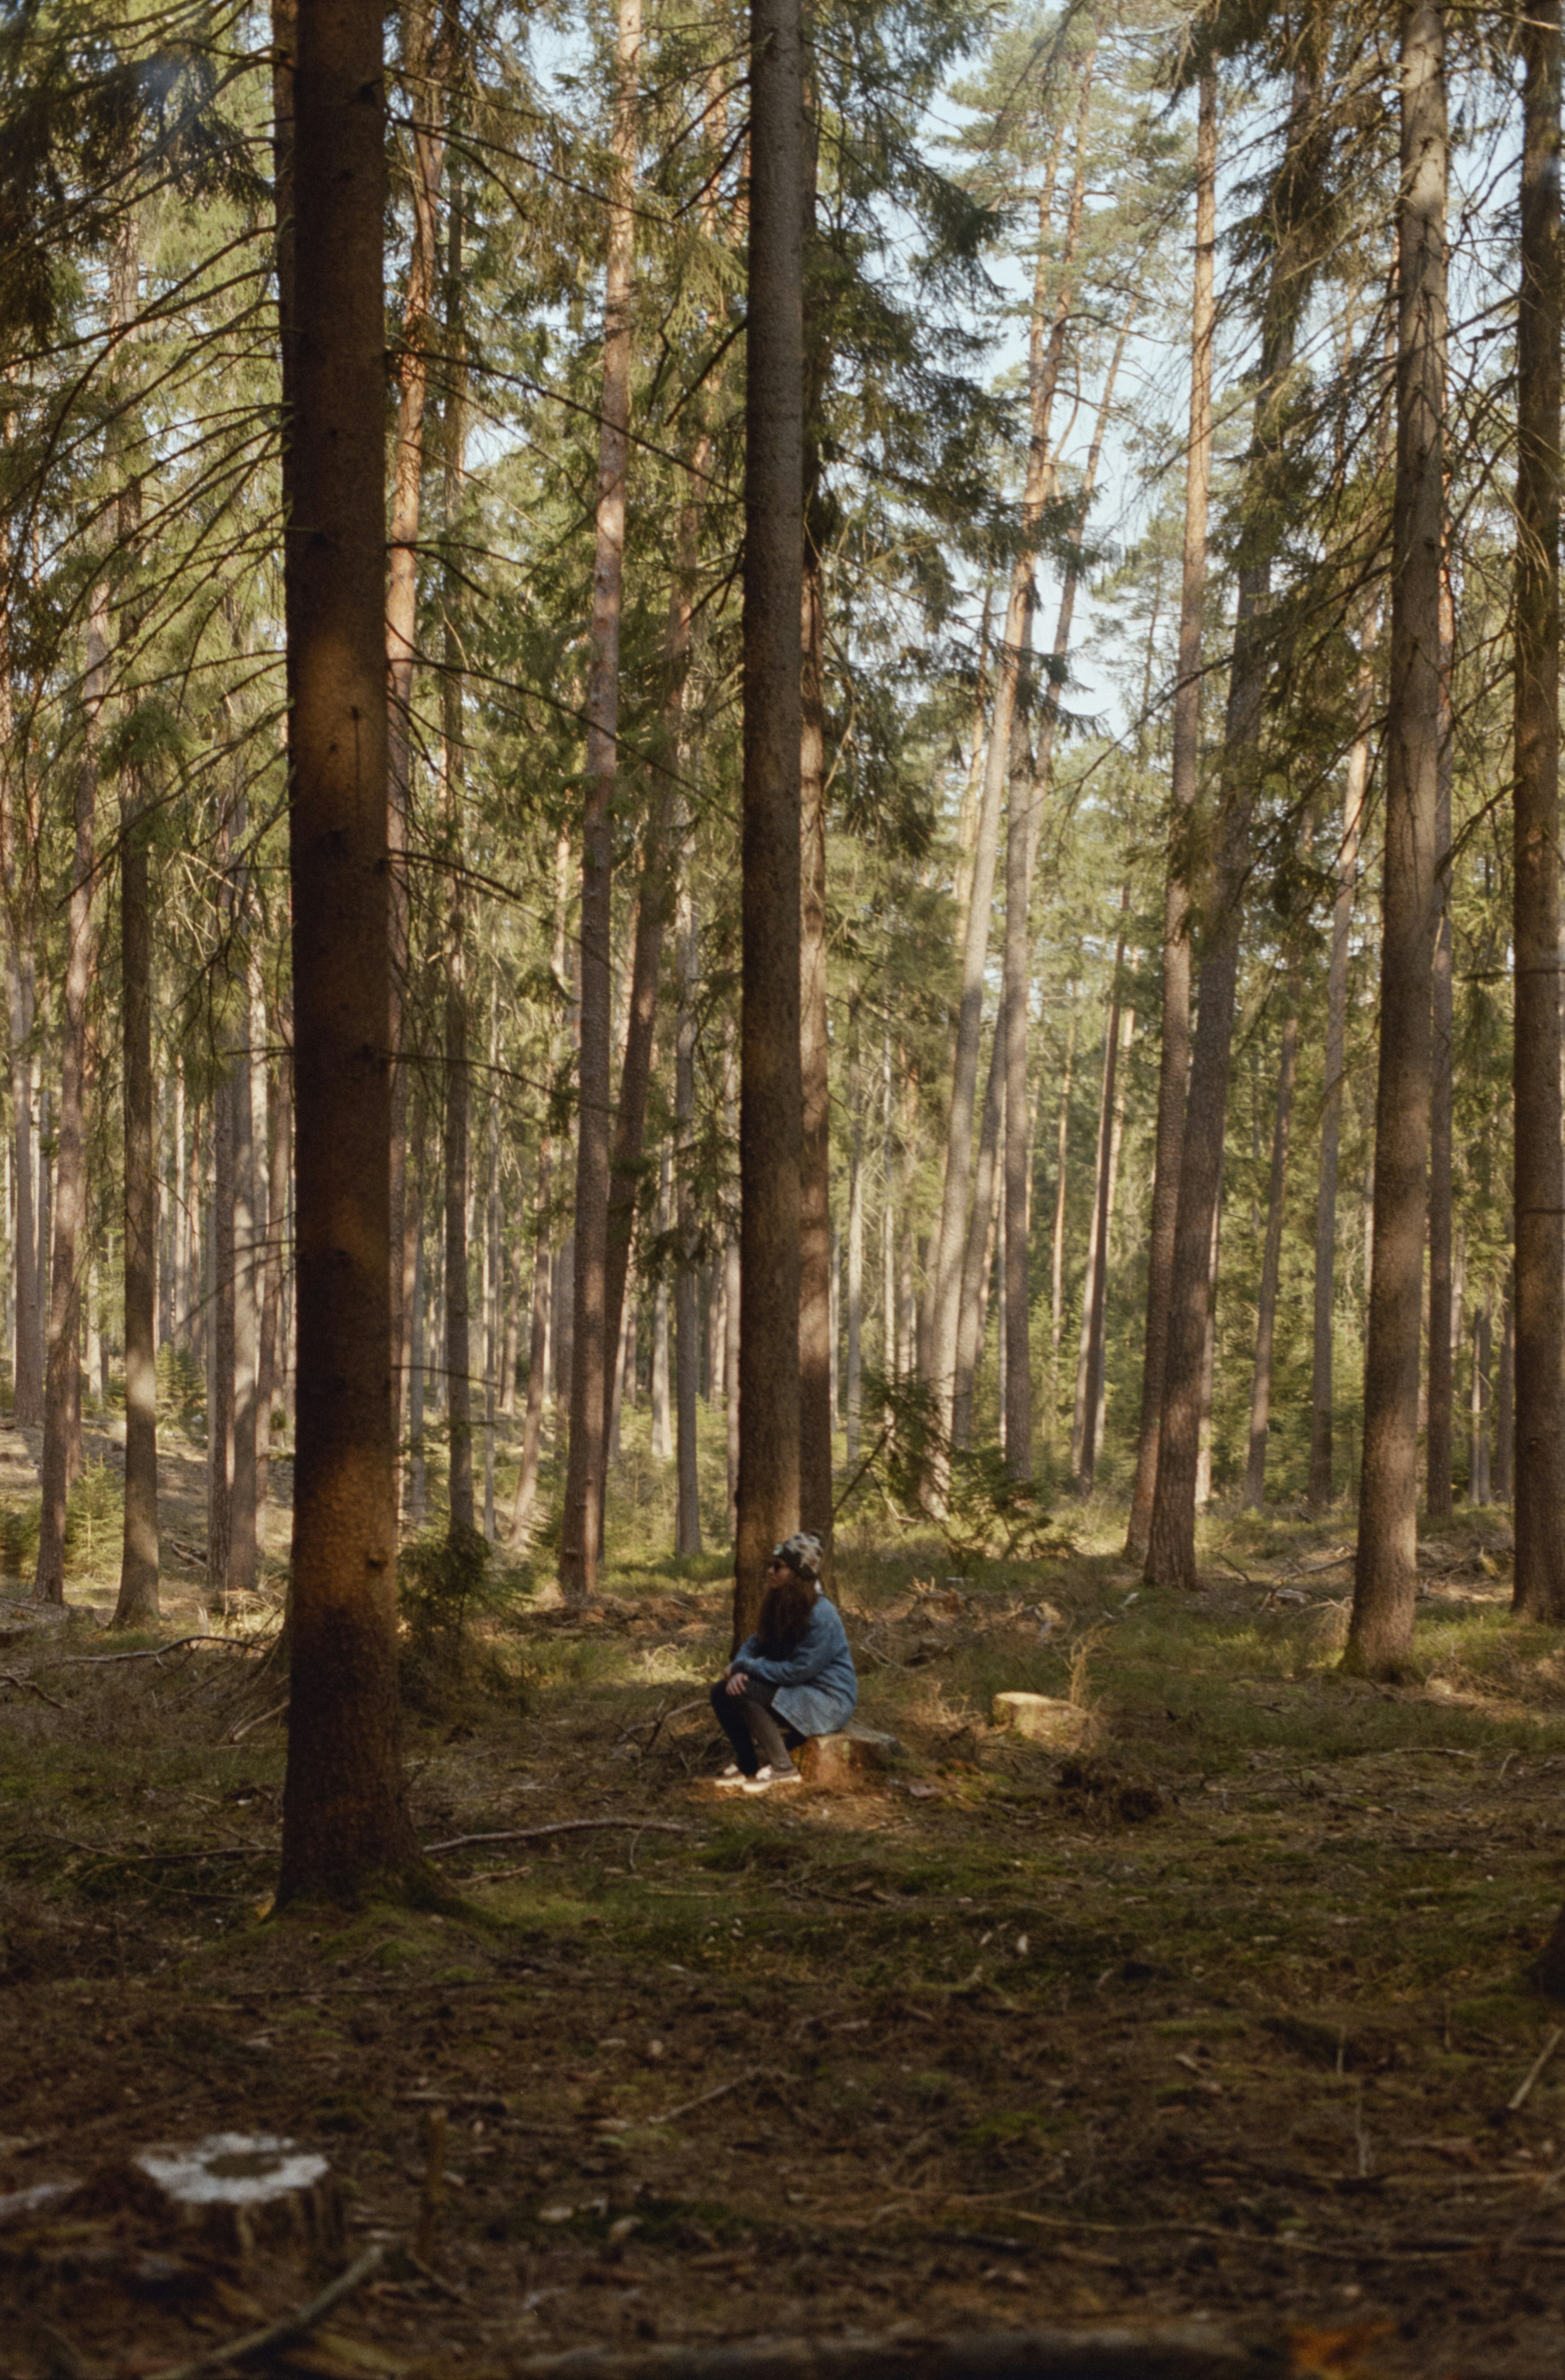 person in black jacket sitting on ground surrounded by trees during daytime